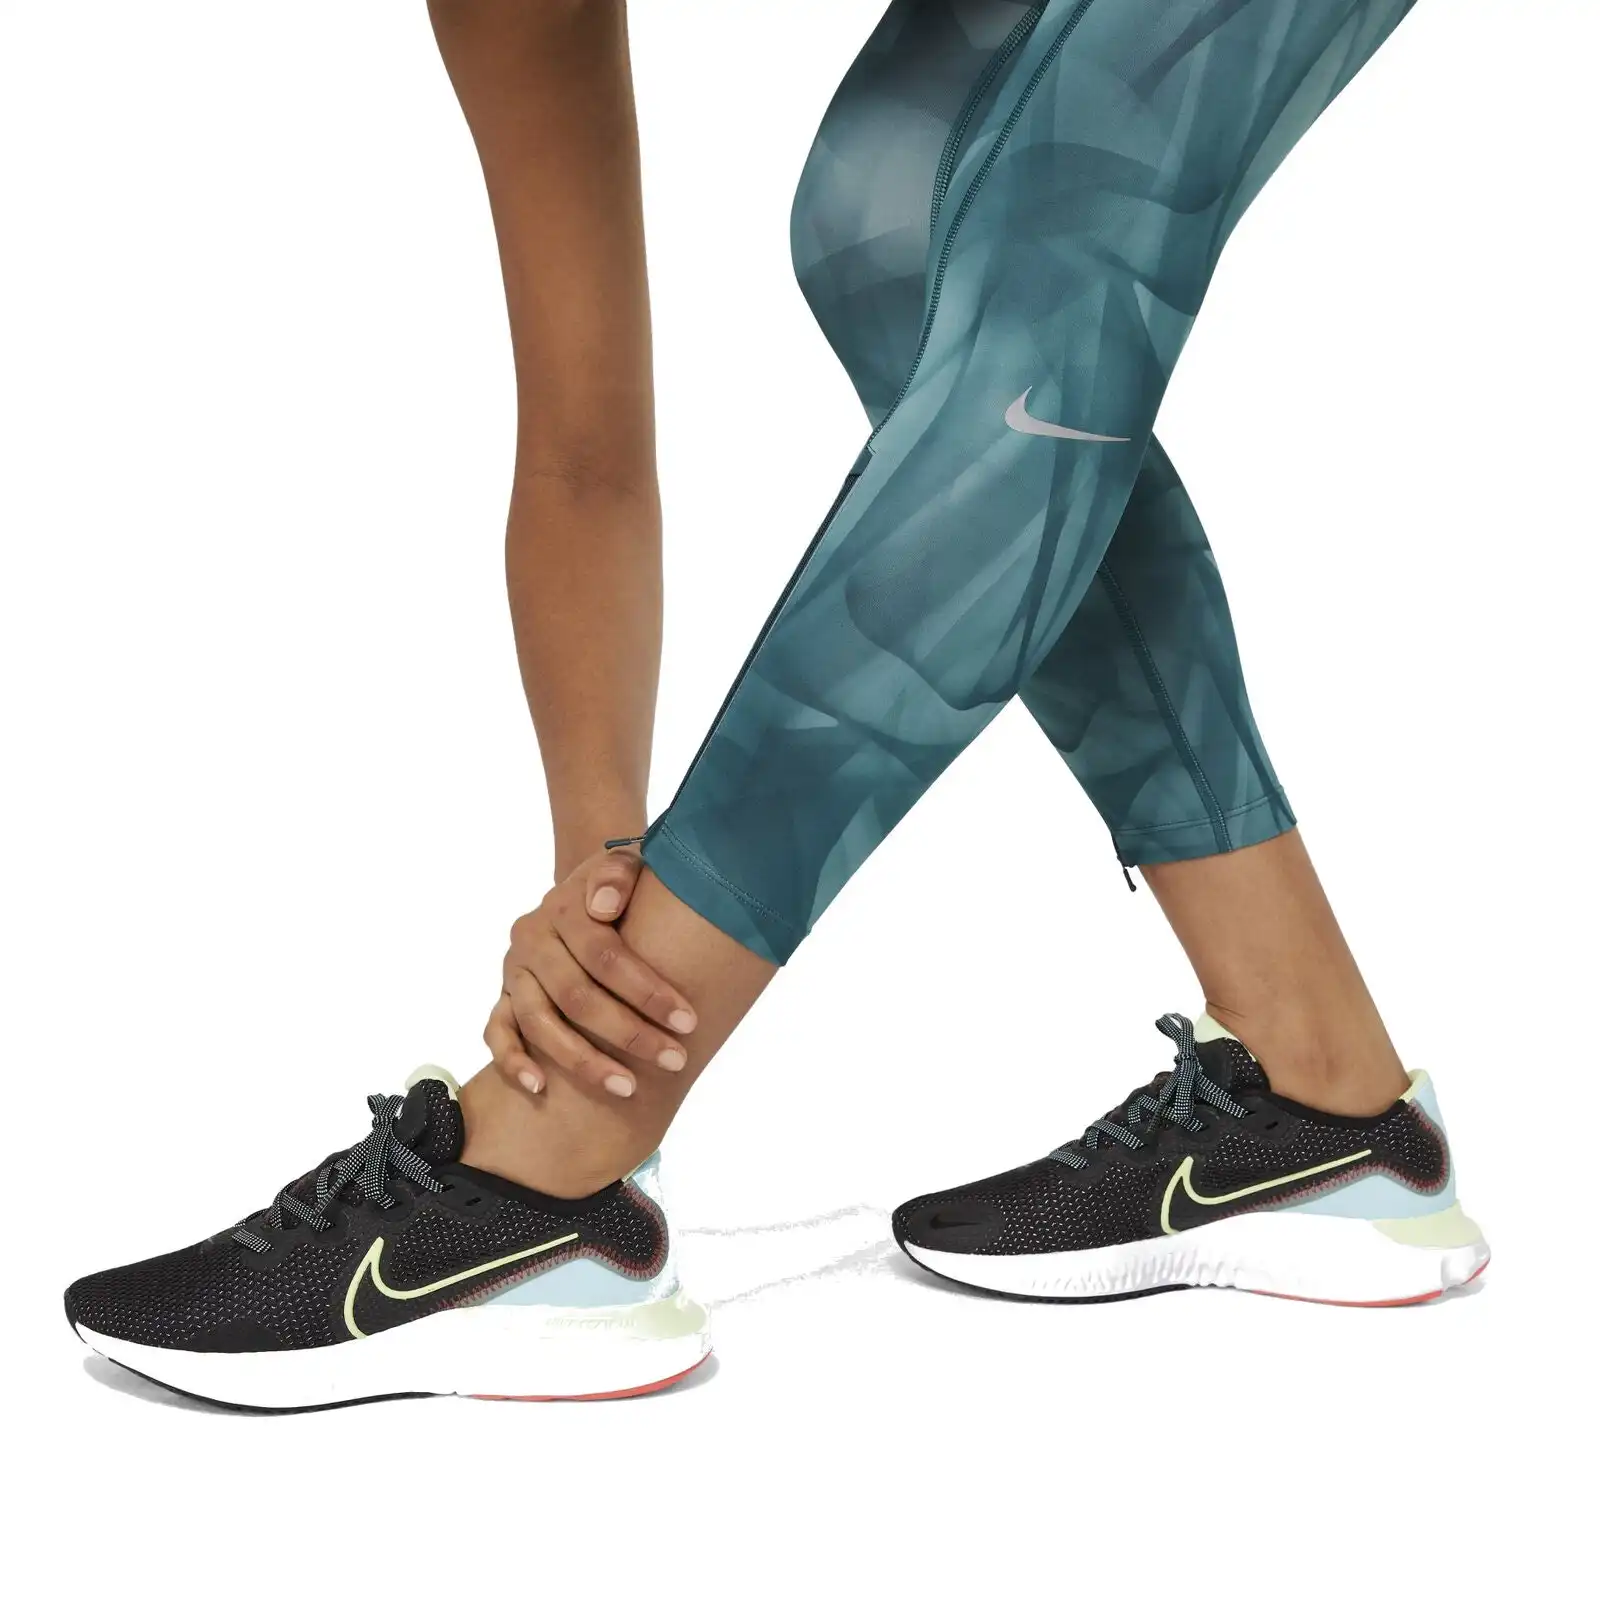 Nike Women's Epic Faster Run Division 7/8 Running Tights - Blue